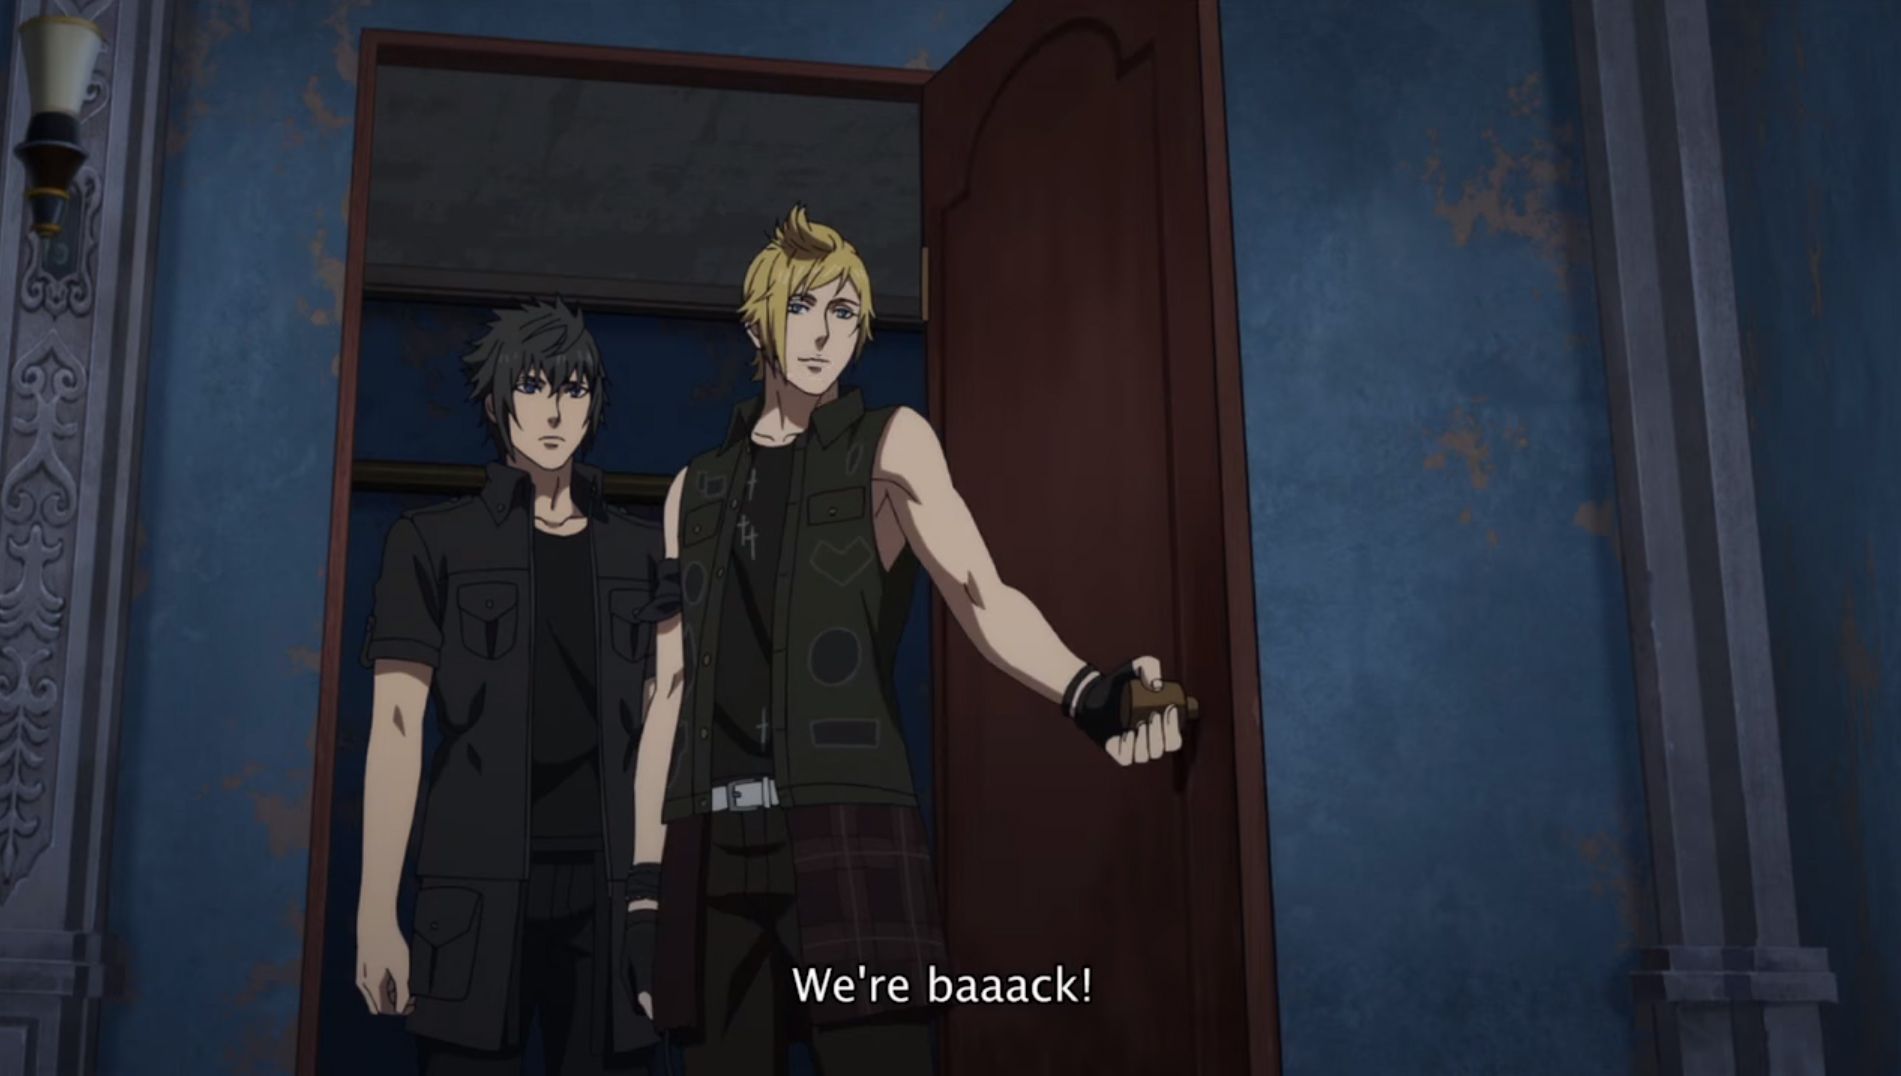 Brotherhood Final Fantasy XV Gets Emotional New Episode 4 Trailer and  Release Date